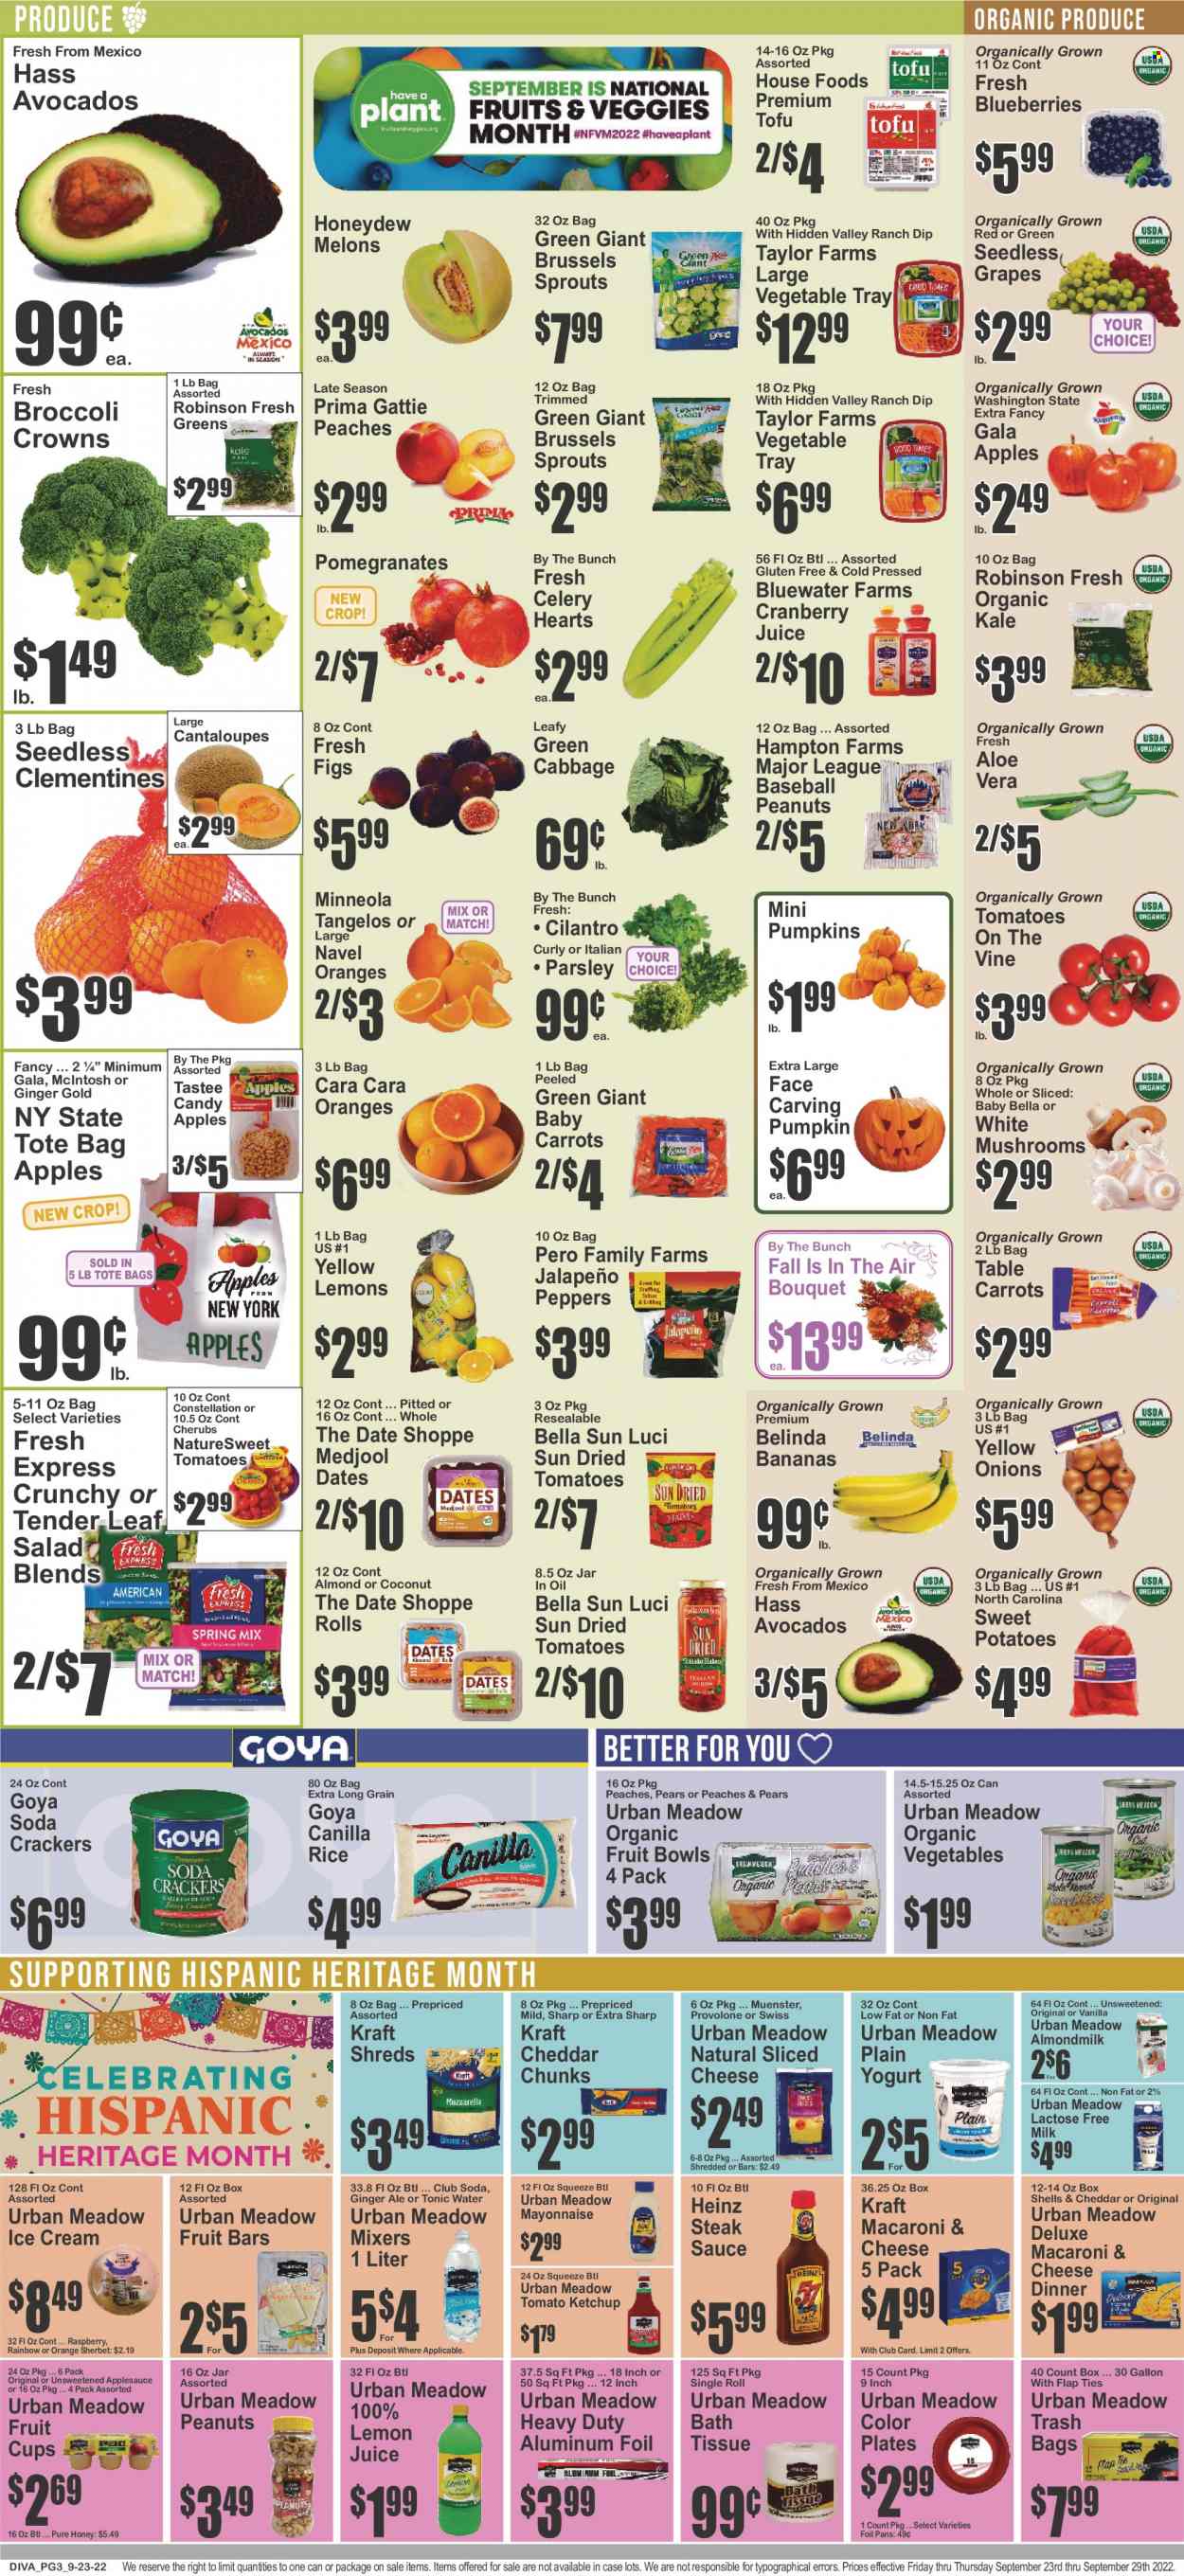 thumbnail - Key Food Flyer - 09/23/2022 - 09/29/2022 - Sales products - mushrooms, cabbage, cantaloupe, carrots, celery, sweet potato, kale, potatoes, pumpkin, parsley, onion, salad, jalapeño, brussel sprouts, sleeved celery, avocado, figs, Gala, grapes, seedless grapes, tangelos, honeydew, pears, oranges, fruit cup, macaroni & cheese, sauce, Kraft®, sliced cheese, Münster cheese, tofu, Provolone, almond milk, milk, lactose free milk, mayonnaise, dip, ice cream, sherbet, crackers, dried tomatoes, Heinz, Goya, Bella Sun Luci, rice, cilantro, steak sauce, ketchup, apple sauce, honey, peanuts, dried dates, cranberry juice, ginger ale, tonic, Club Soda, lemon juice, steak, bath tissue, trash bags, tray, plate, bouquet, clementines, melons, pomegranate, peaches, navel oranges. Page 4.